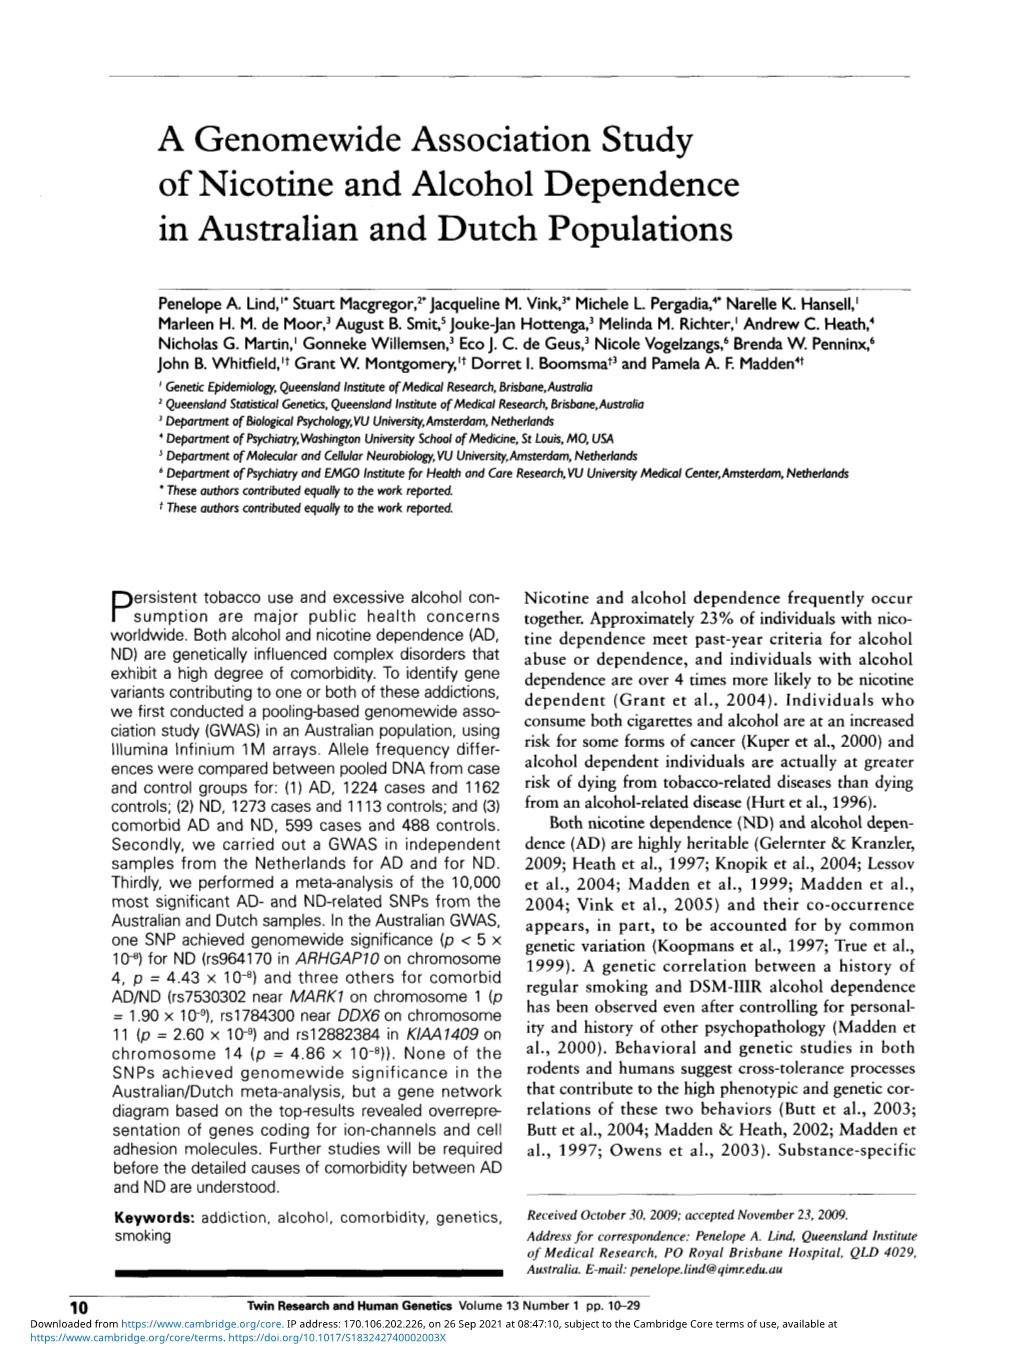 A Genomewide Association Study of Nicotine and Alcohol Dependence in Australian and Dutch Populations